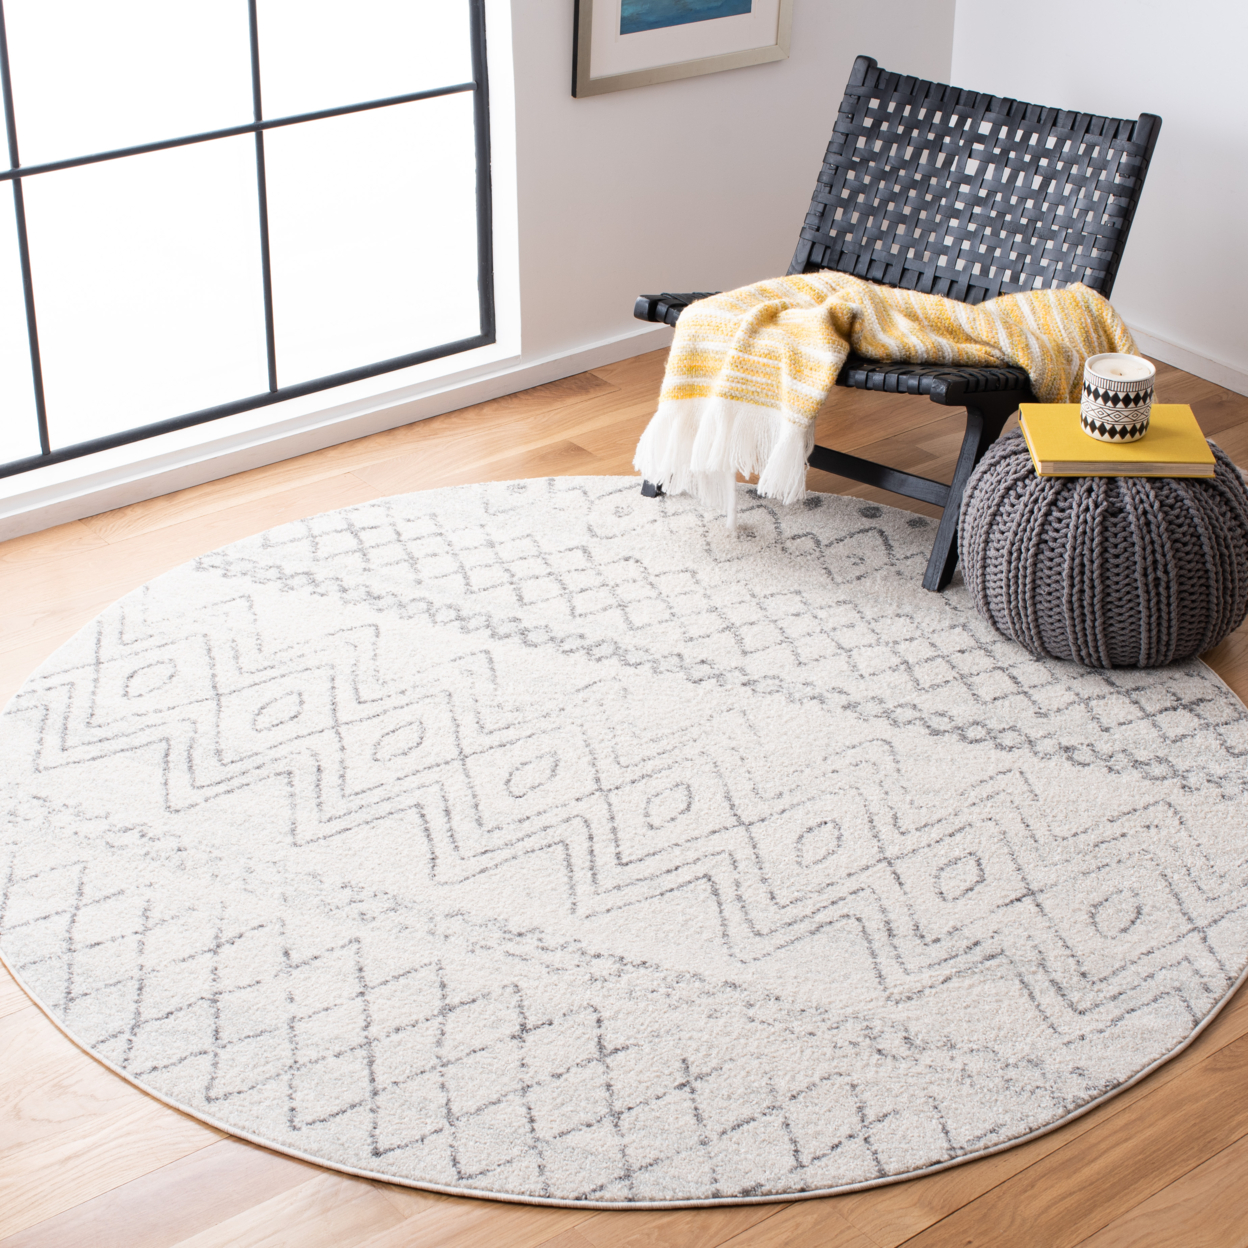 SAFAVIEH Madison Collection MAD798D Ivory / Charcoal Rug - 5-1 X 7-6